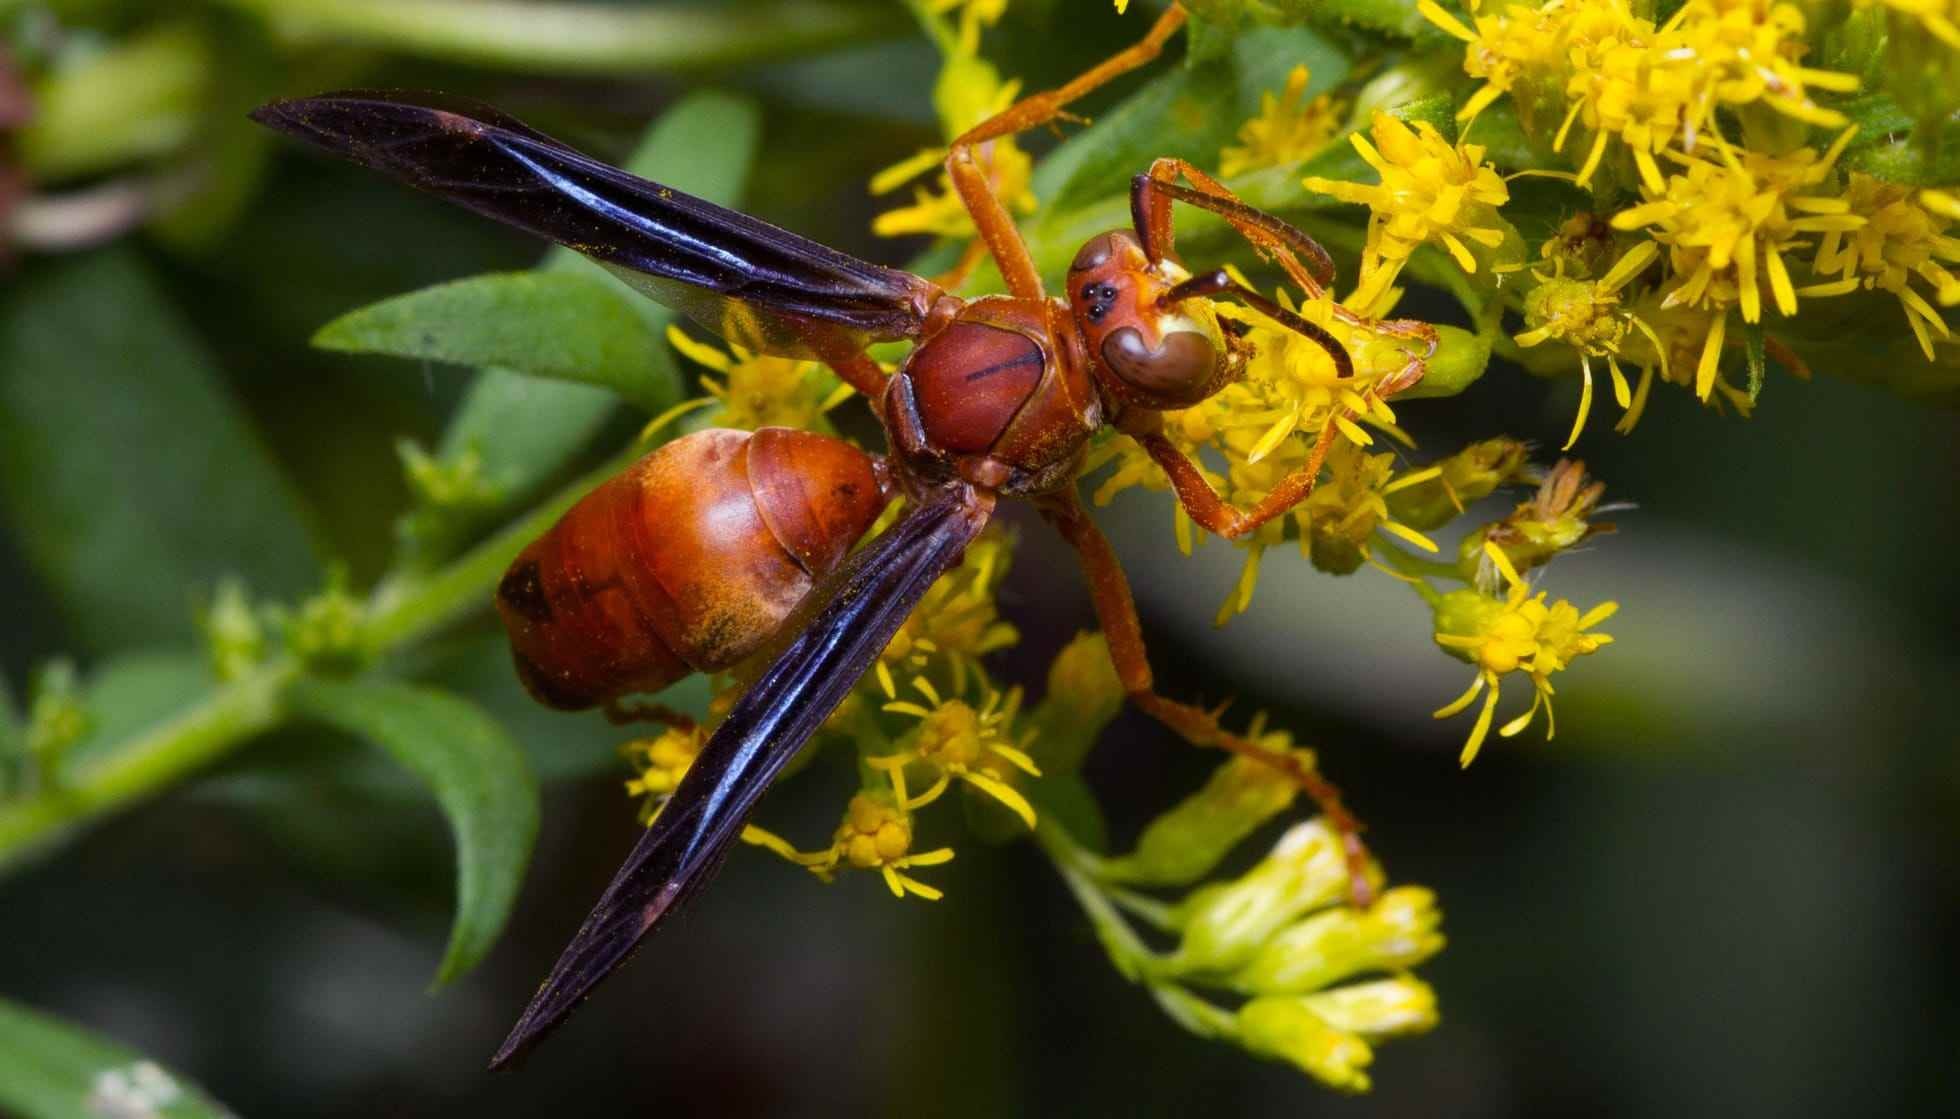 Fun Red Paper Wasp Facts For Kids | Kidadl